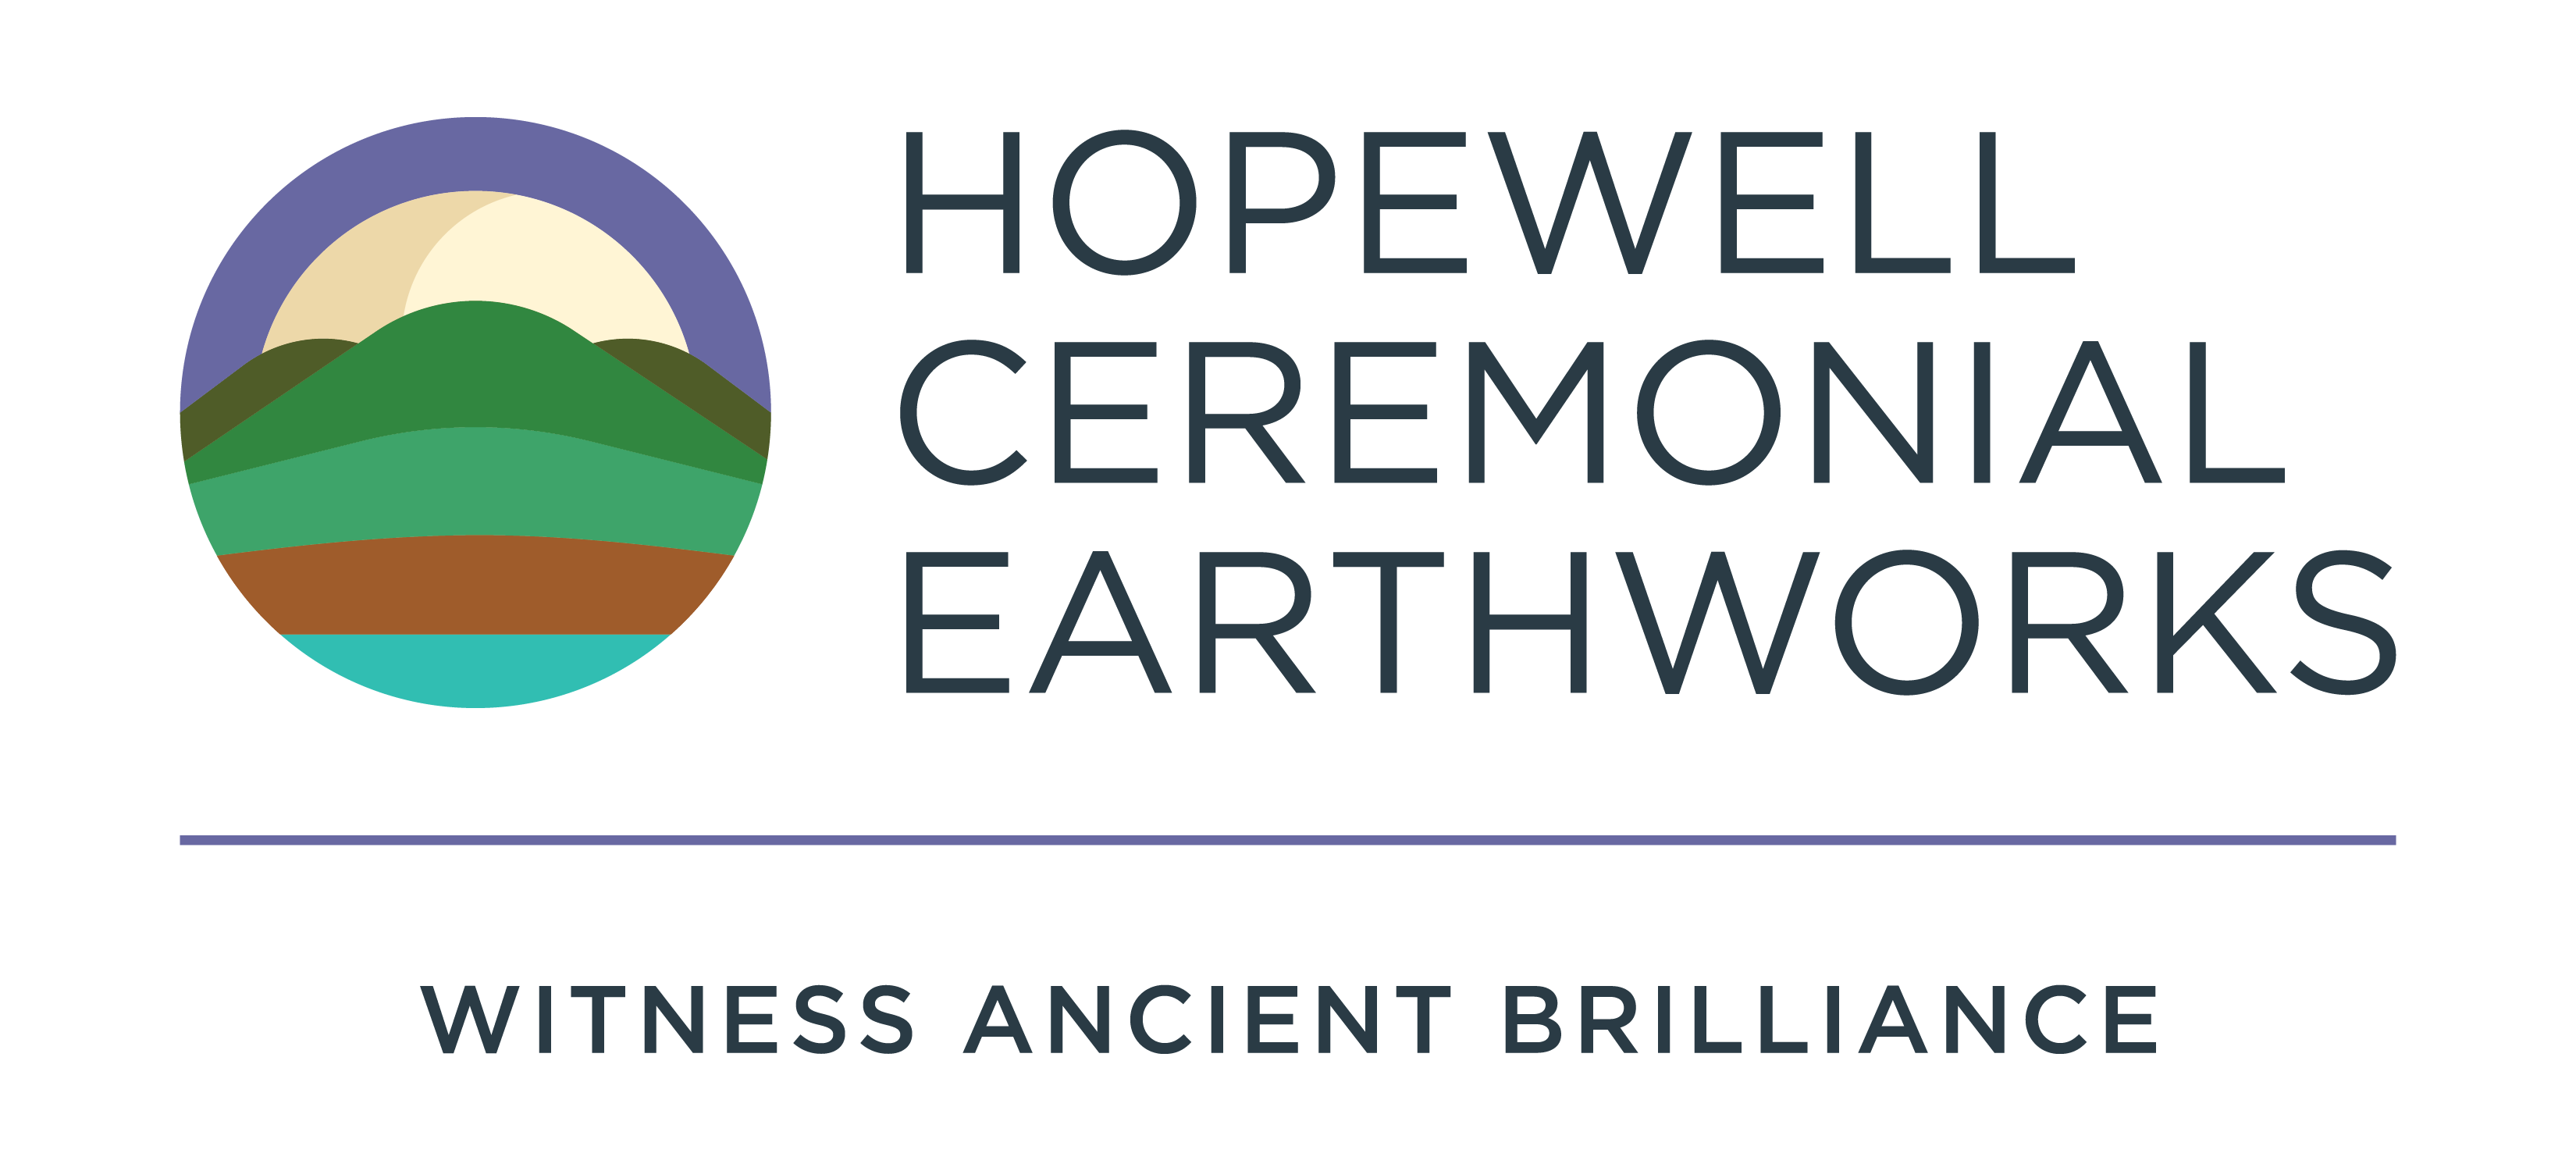 circle logo composed of colored layers in purple, green and brown text reads Hopewell Ceremonial Earthworks Witness Ancient Brilliance